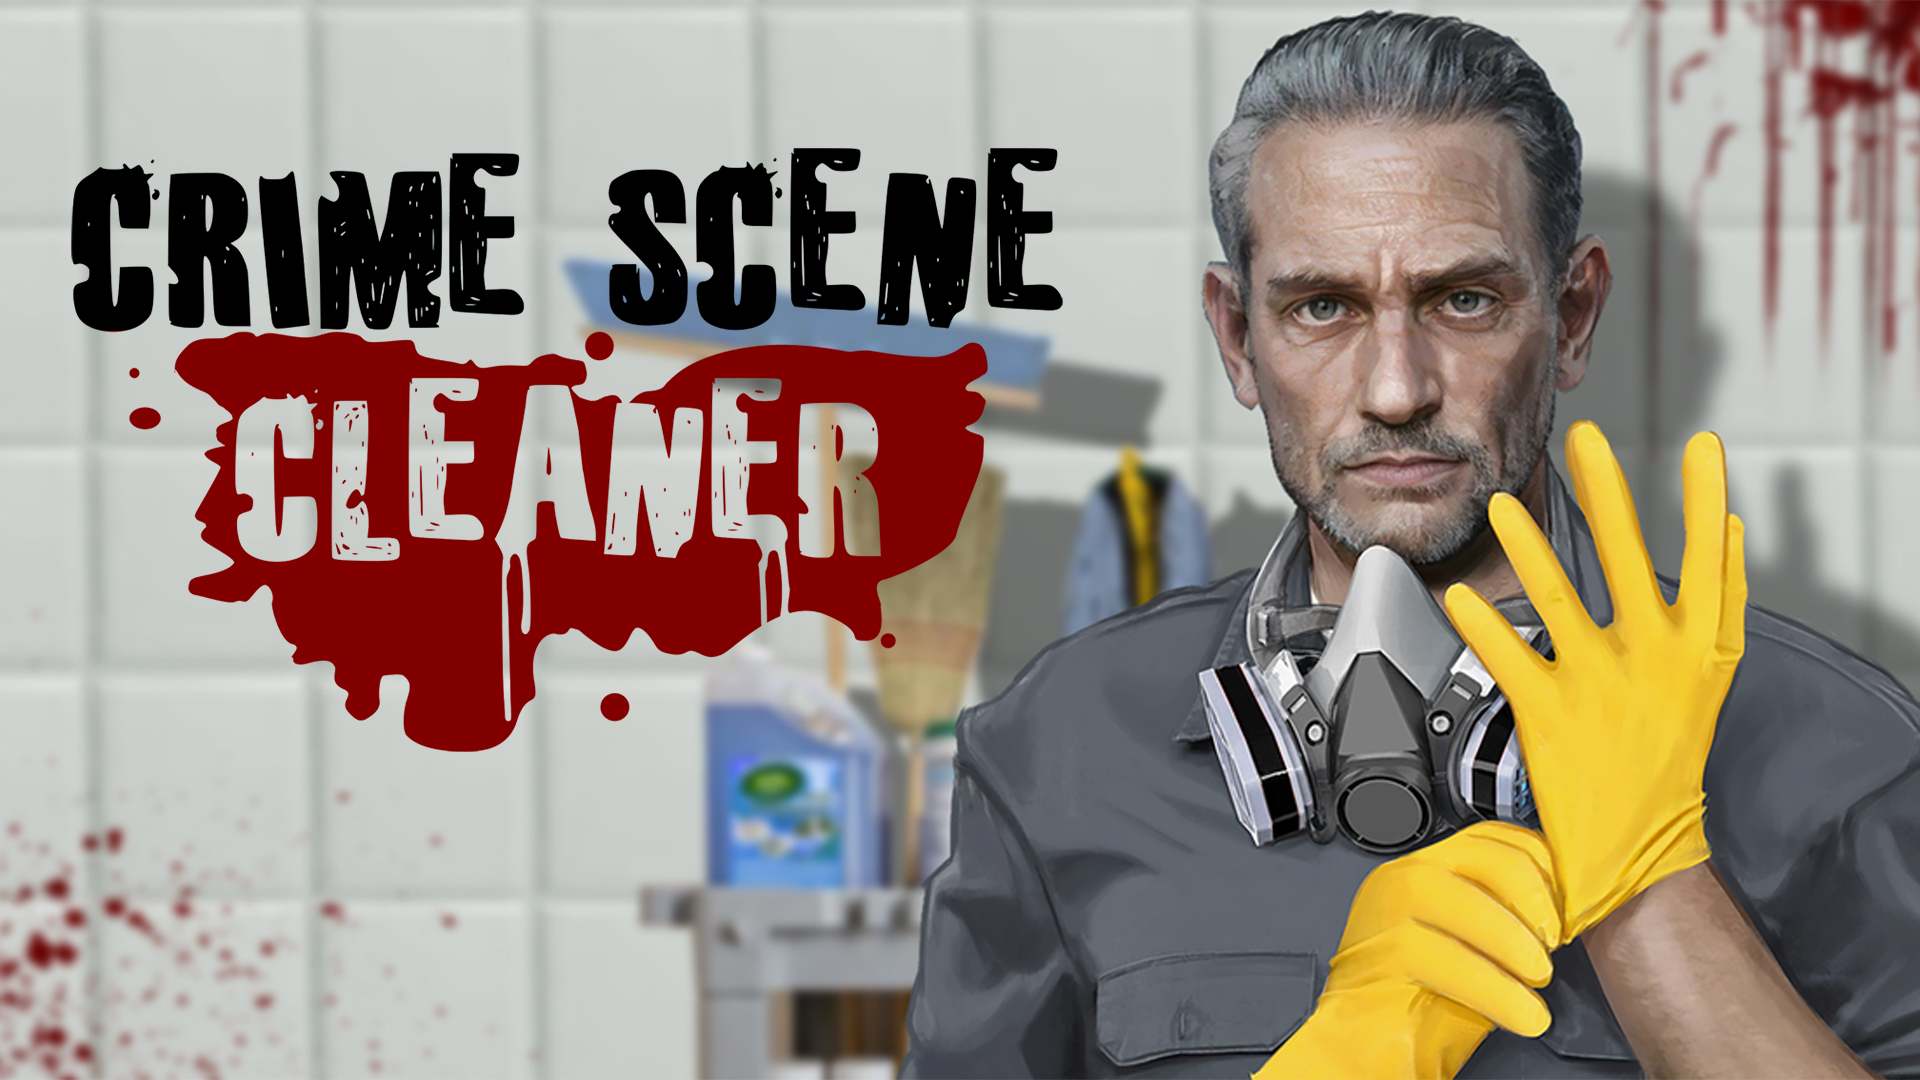 Crime Scene Cleaner opens up playtests on PC